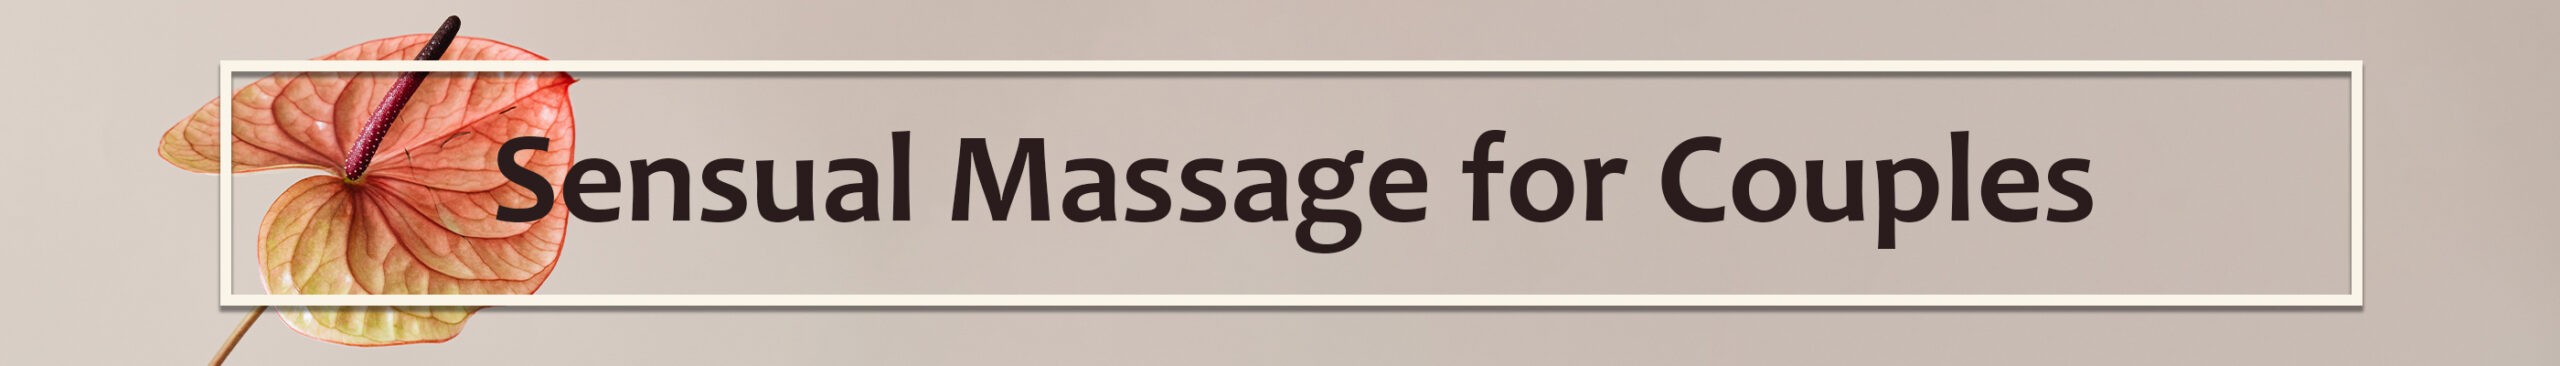 Sensual Massage for Couples